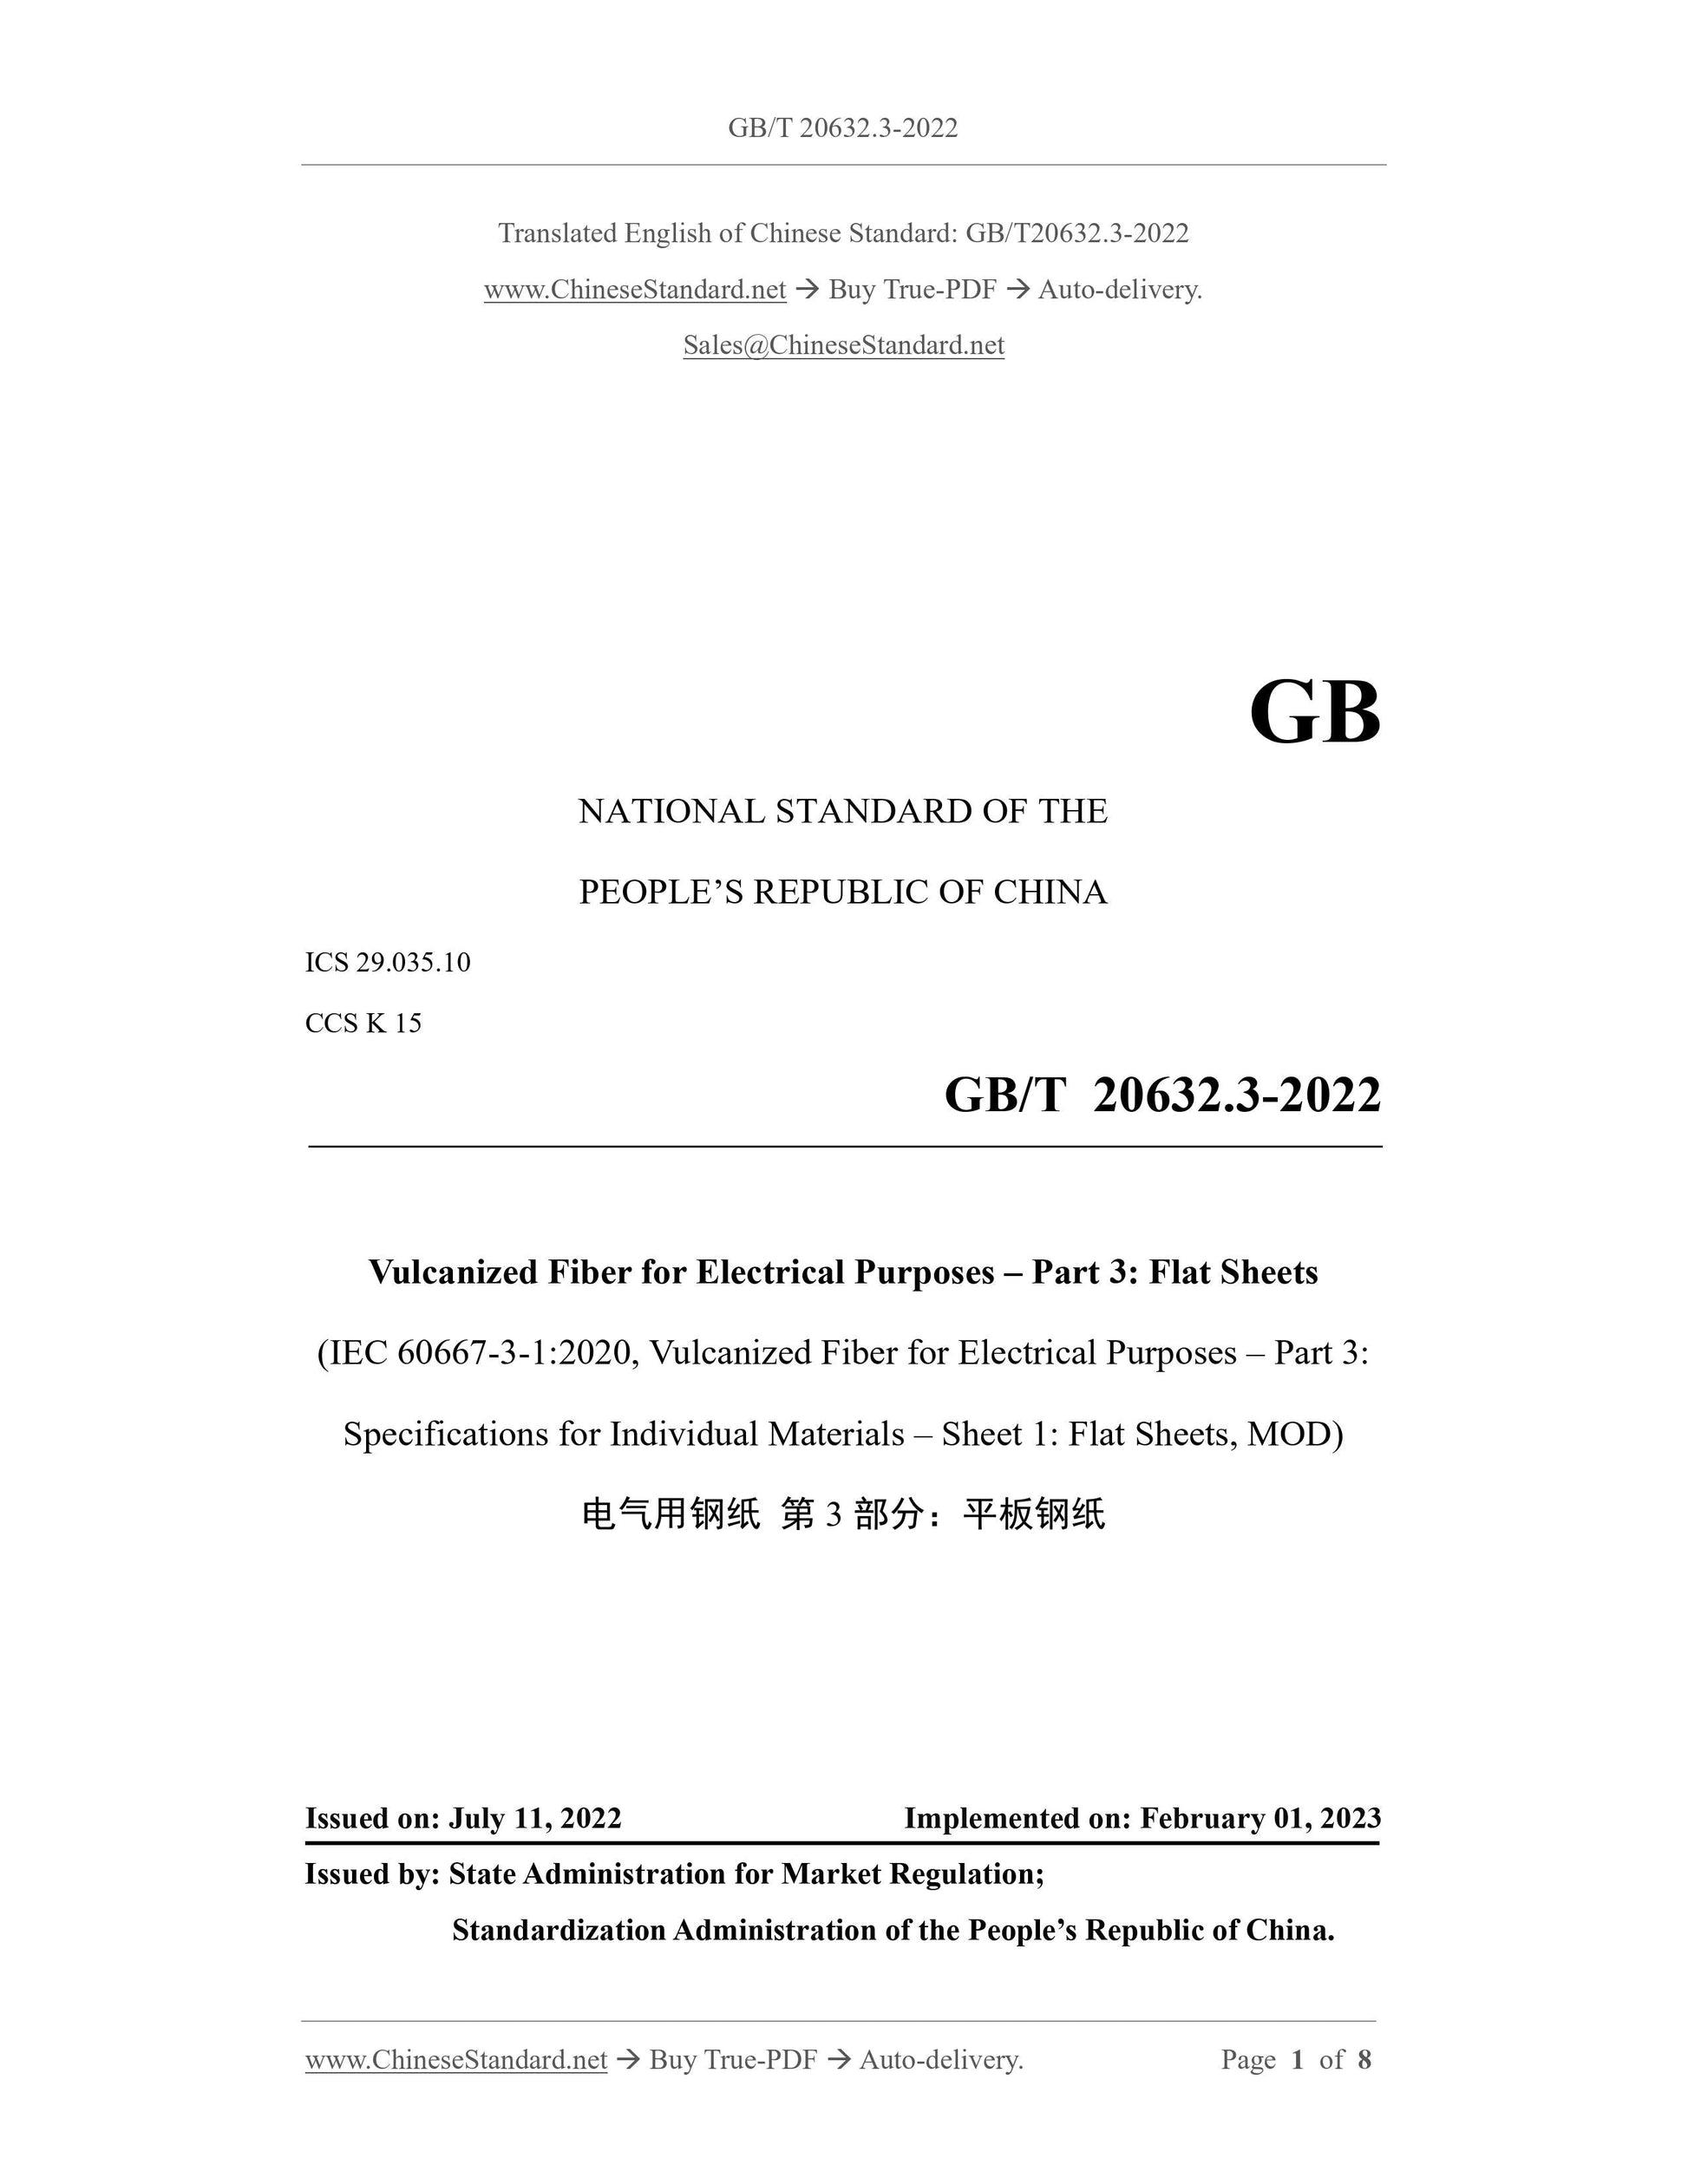 GB/T 20632.3-2022 Page 1